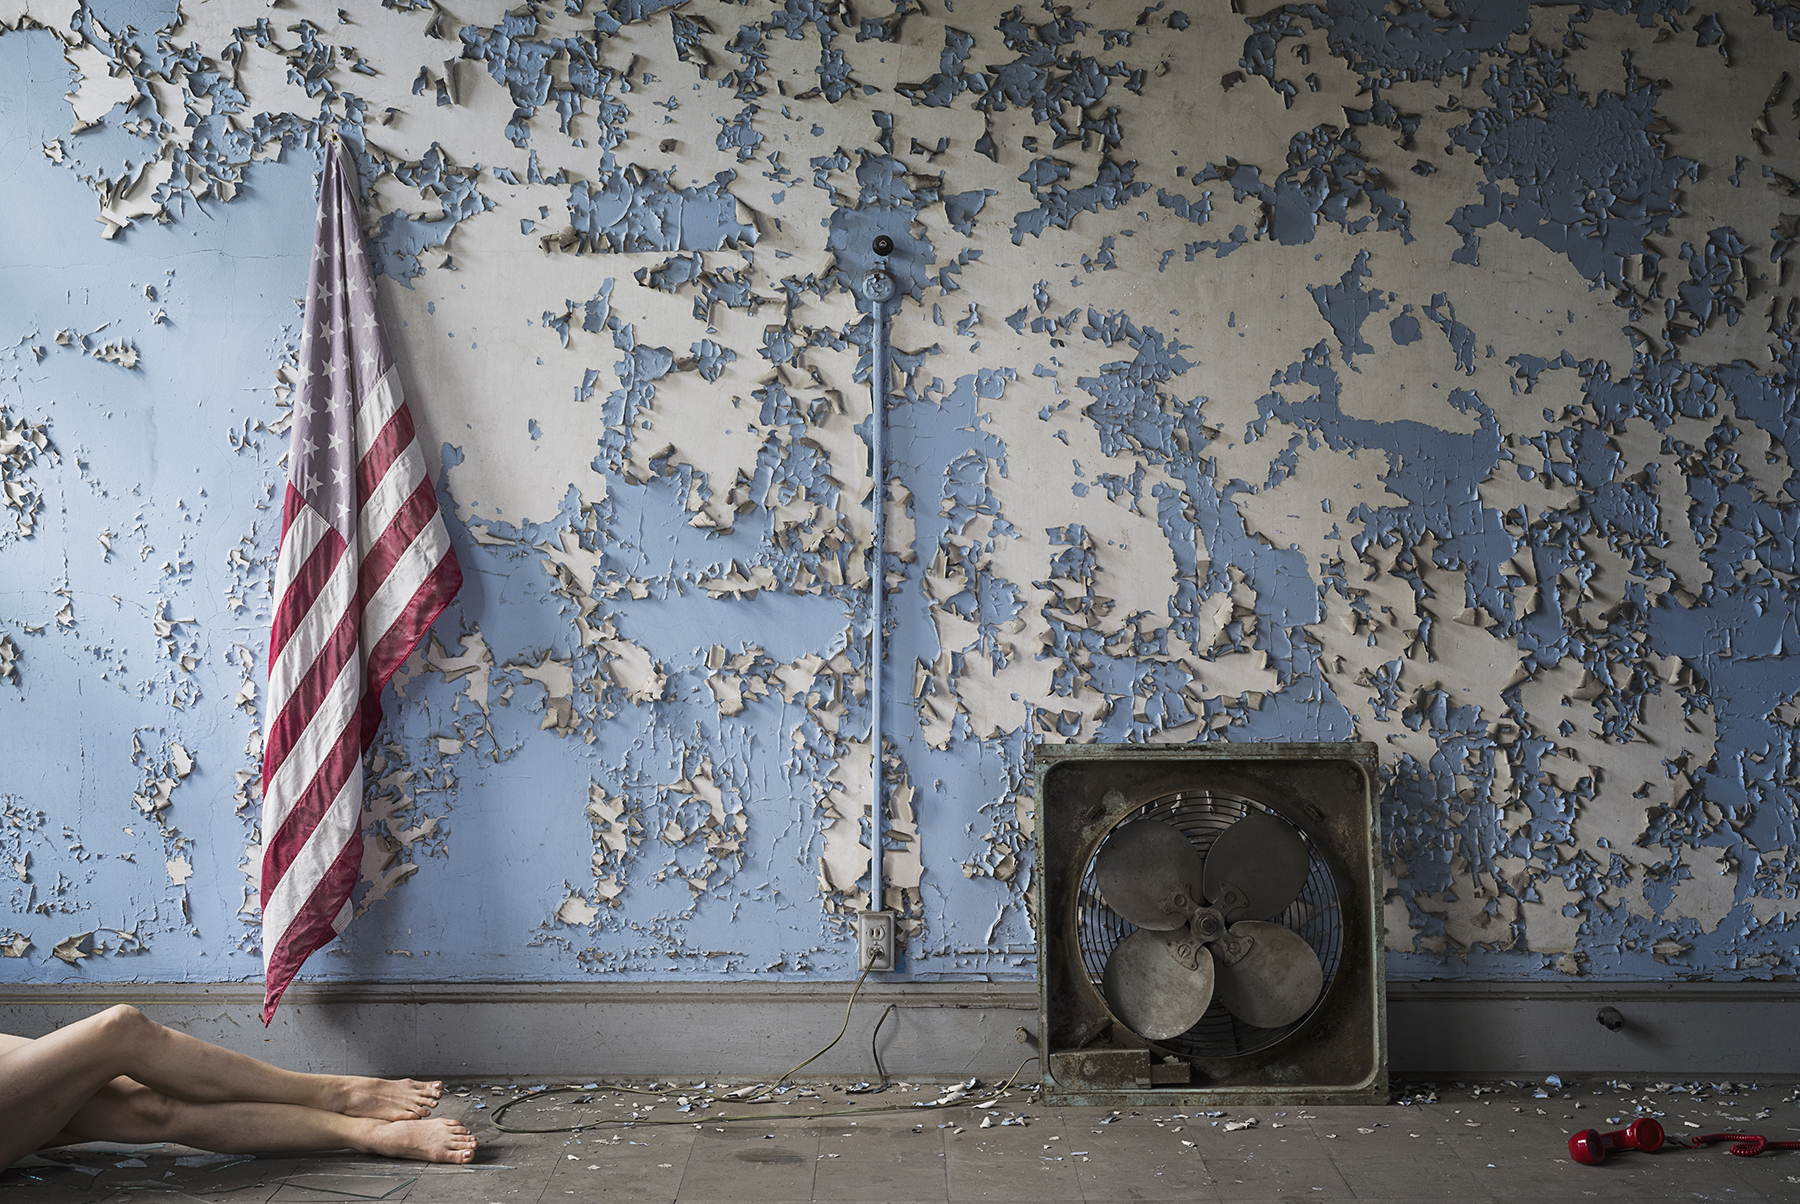 a wall with peeling blue paint, an American flag, a box flag and a red phone. From the left, a pair of female legs emerge.